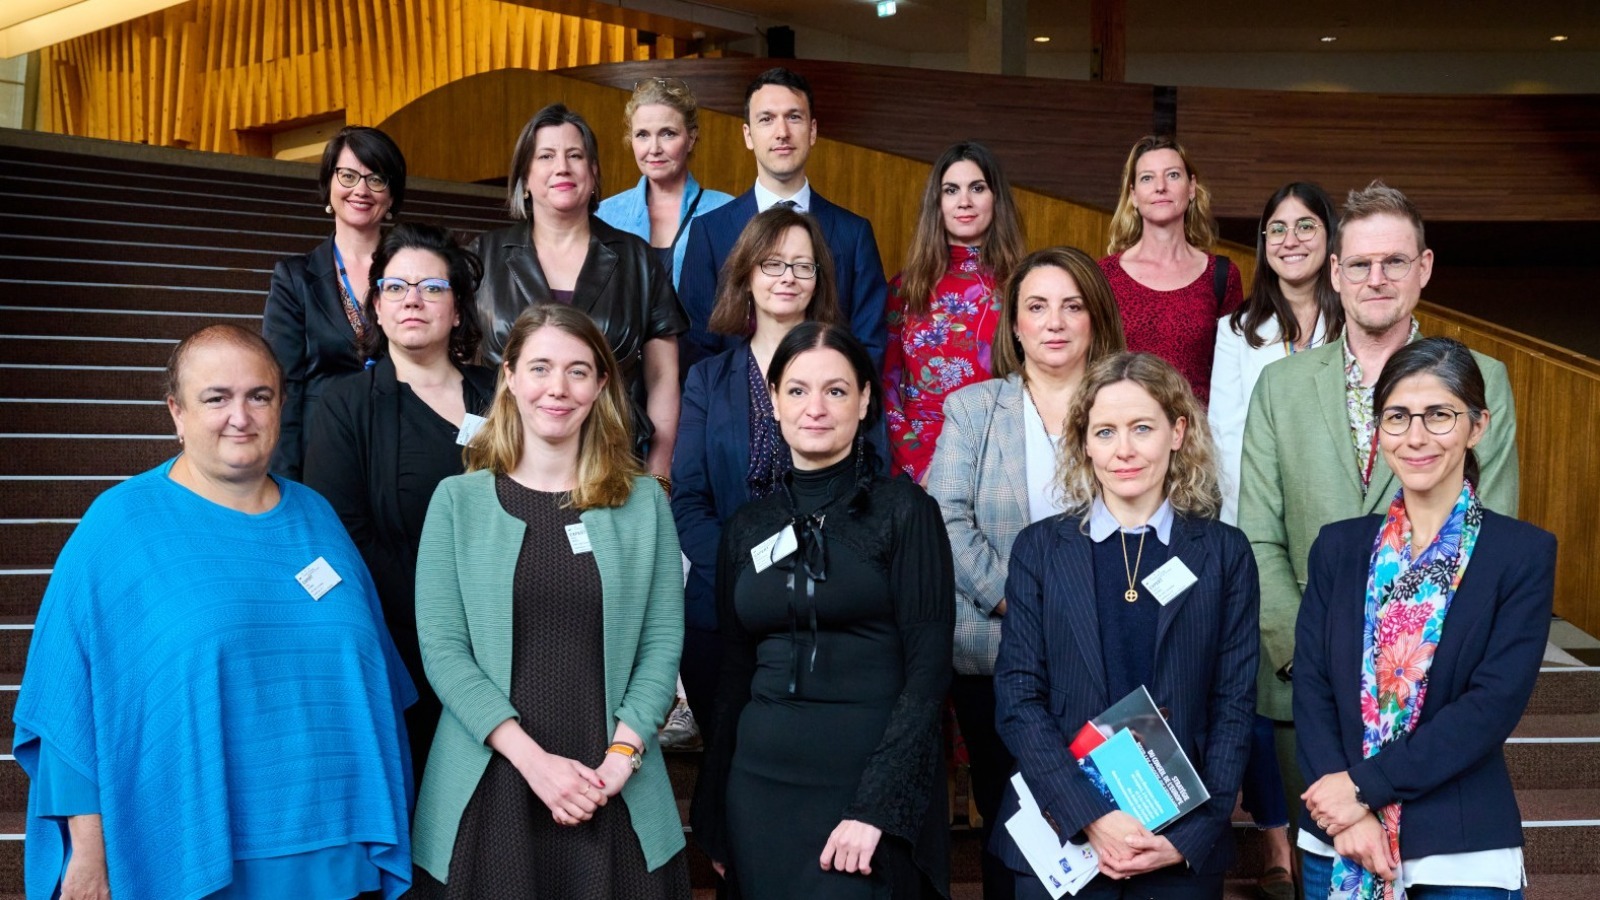 Outcome of the 1st Committee of Experts on the Prevention of Violence (ENF-VAE)